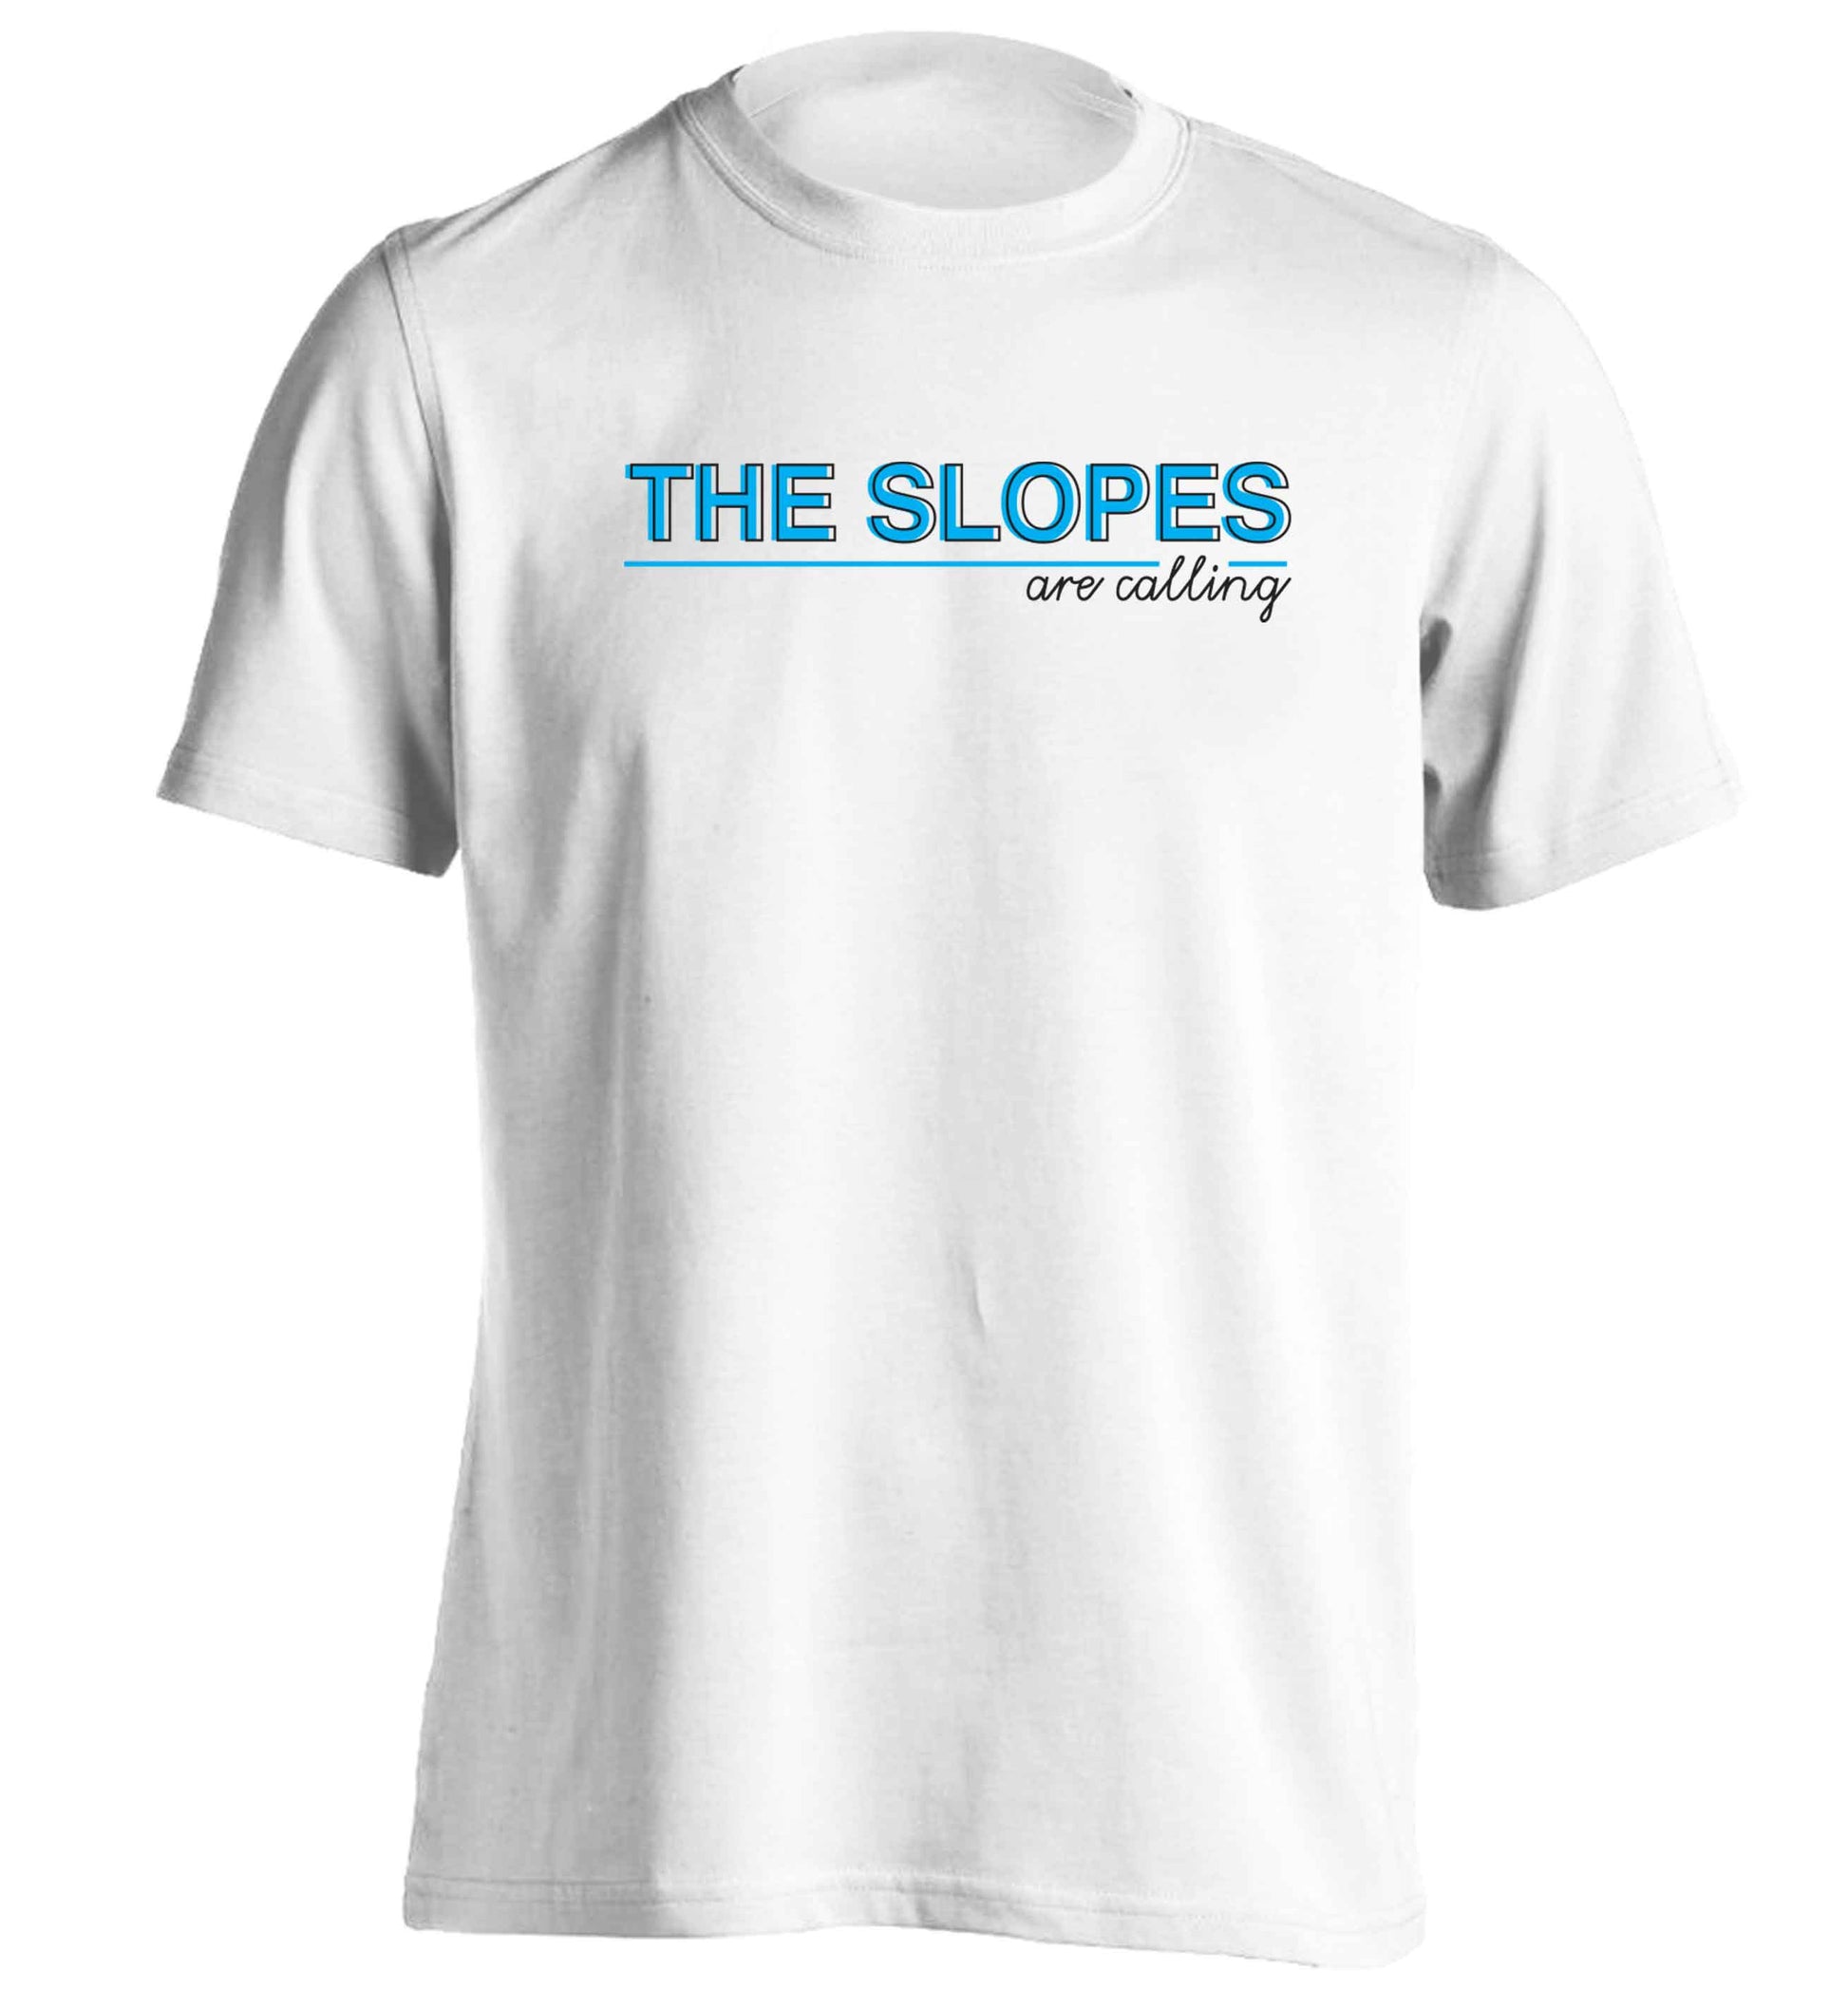 The slopes are calling adults unisex white Tshirt 2XL